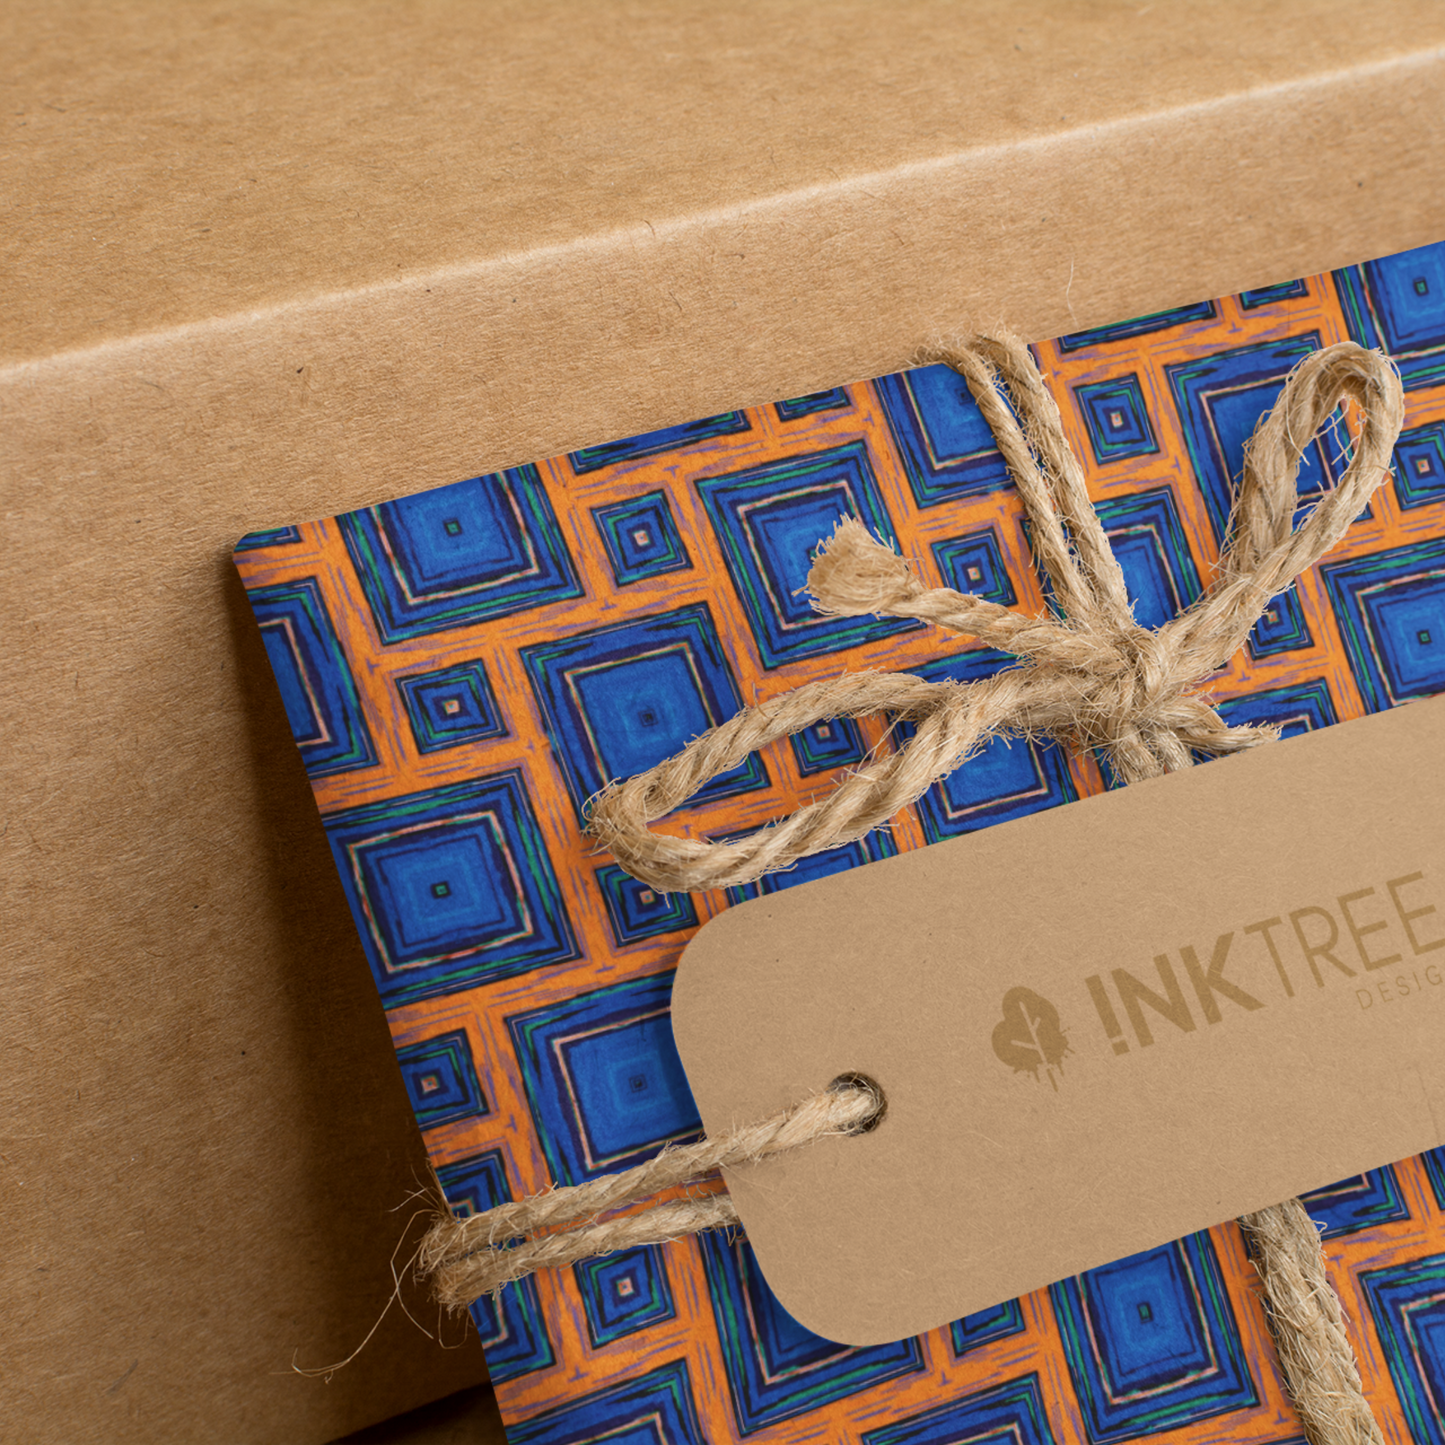 A present wrapped with an orange, white, black, blue and green square pattern, tied with brown string with a brown paper tag with ink tree design logo on it, leaning on a brown paper background.